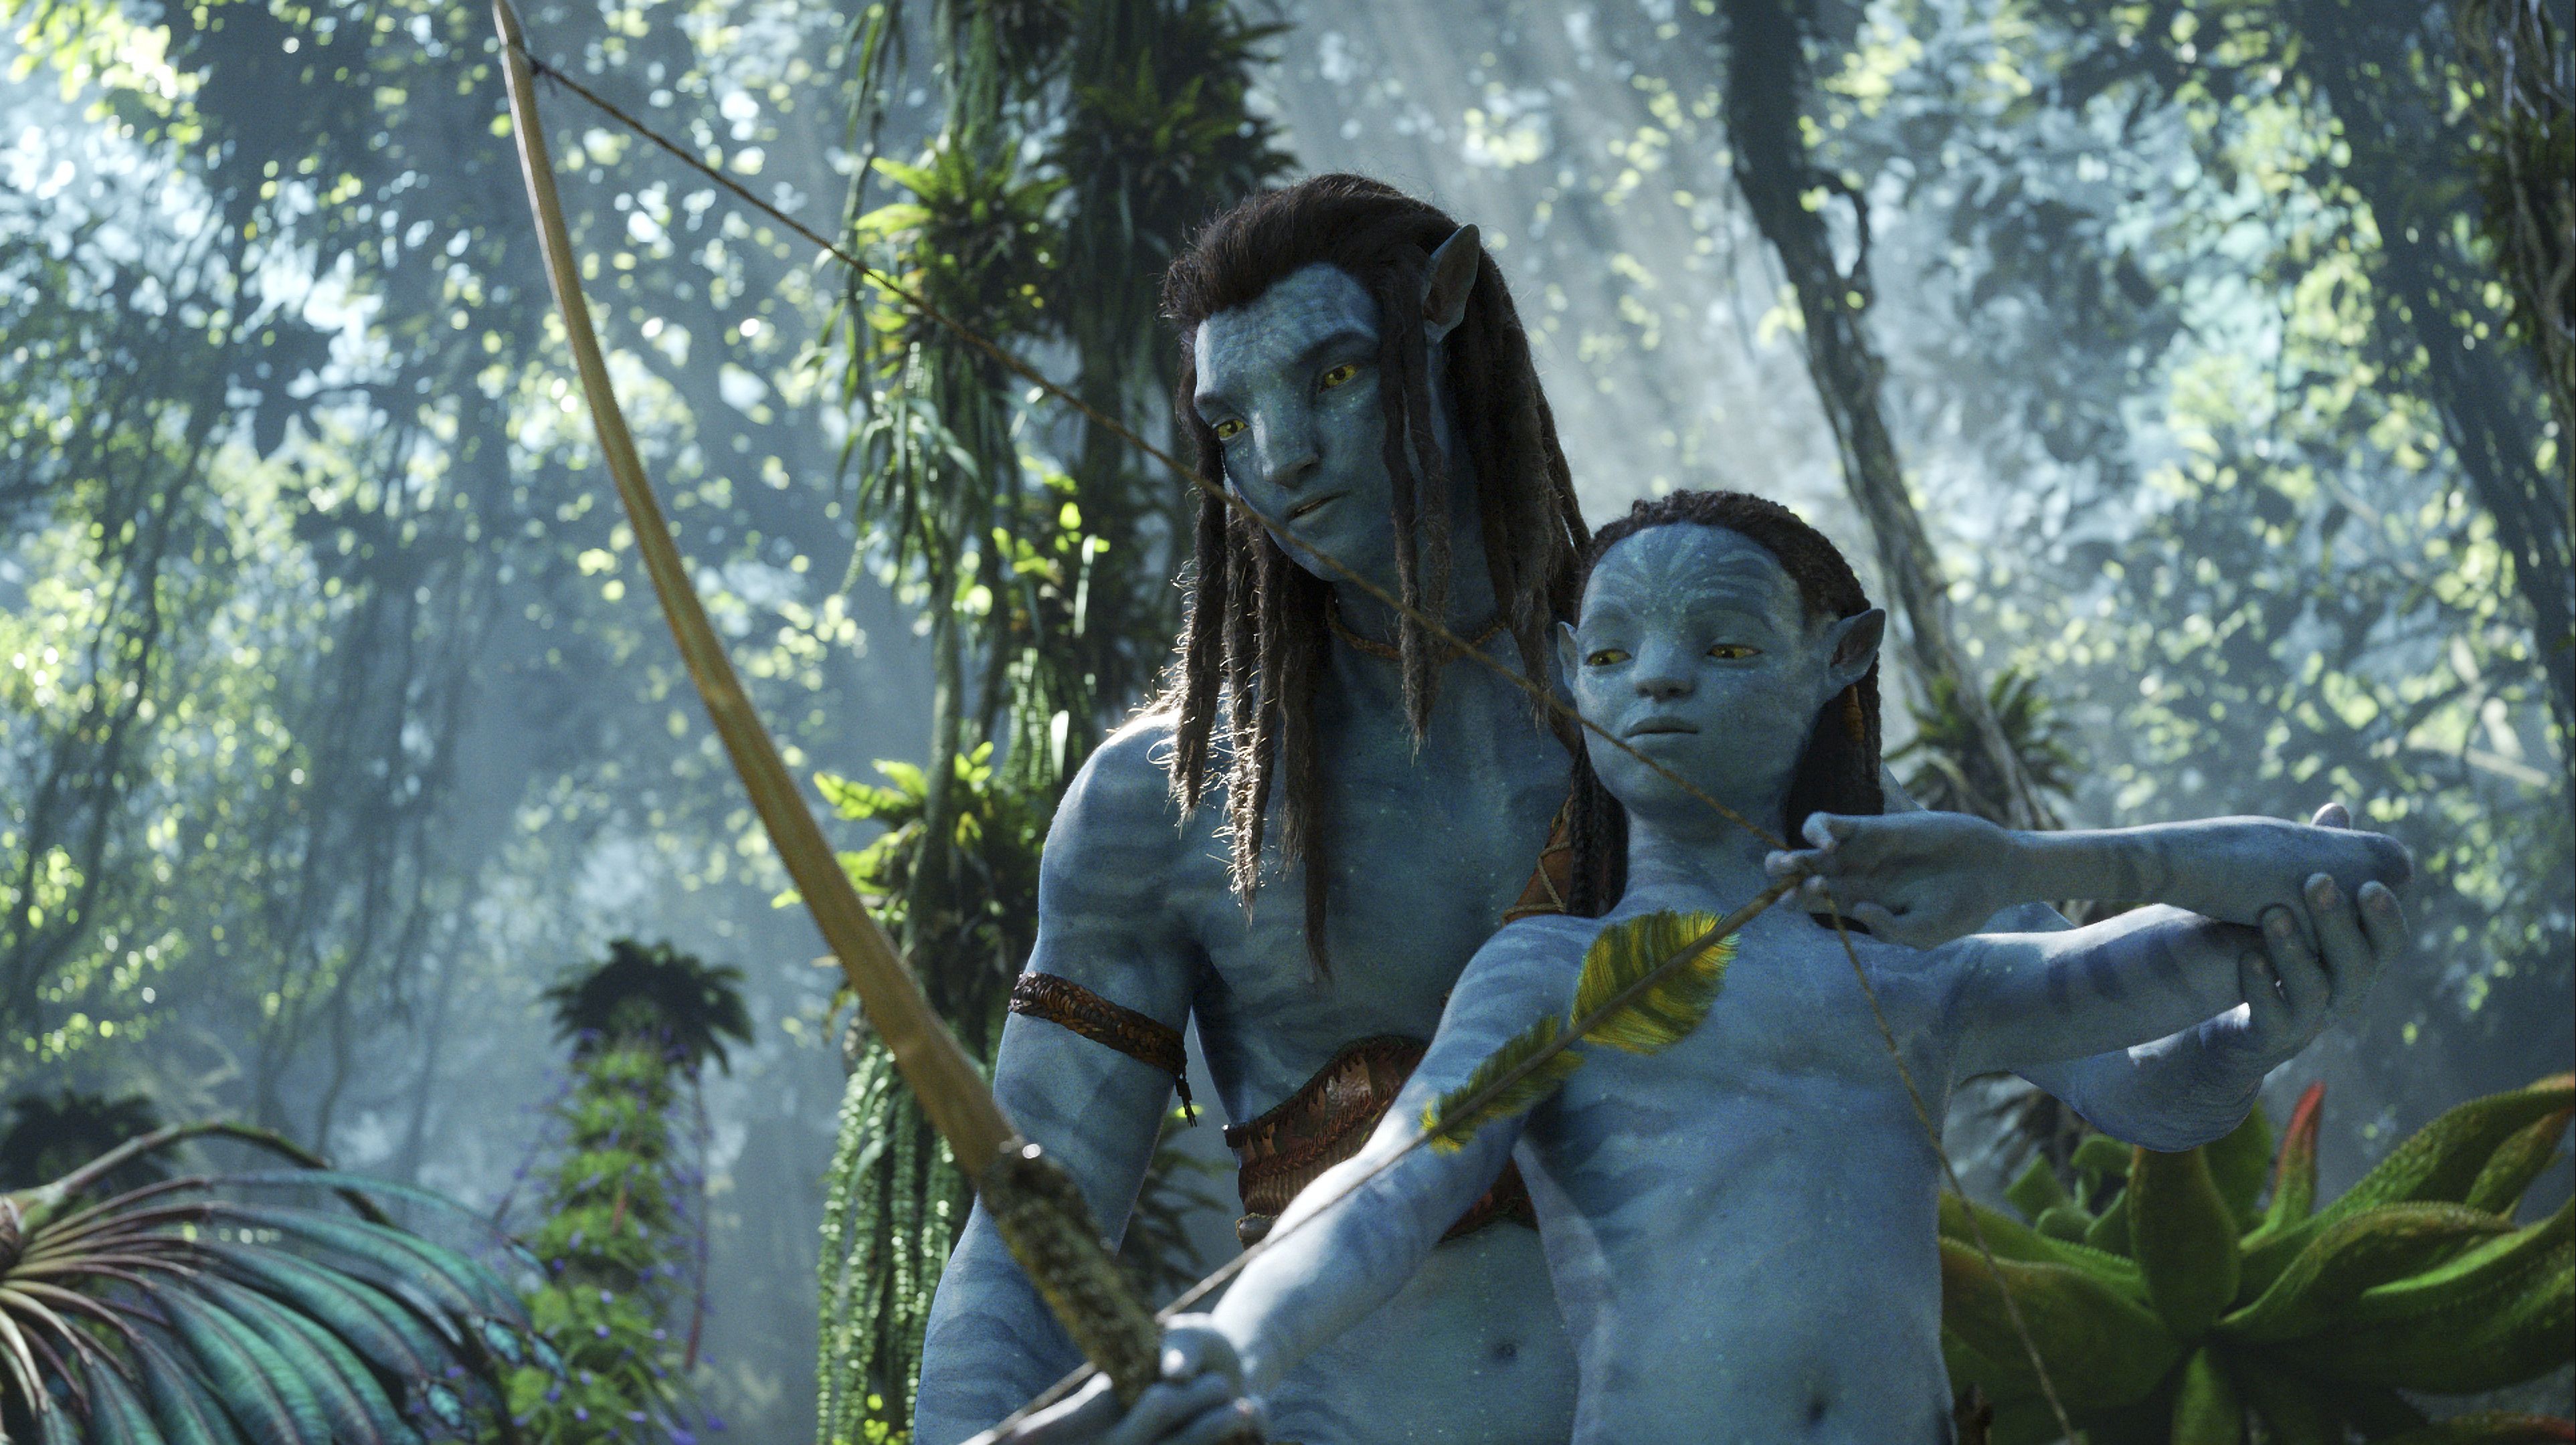 James Cameron Says Avatar 2 Will Make Haters 'Shut the F*** Up'